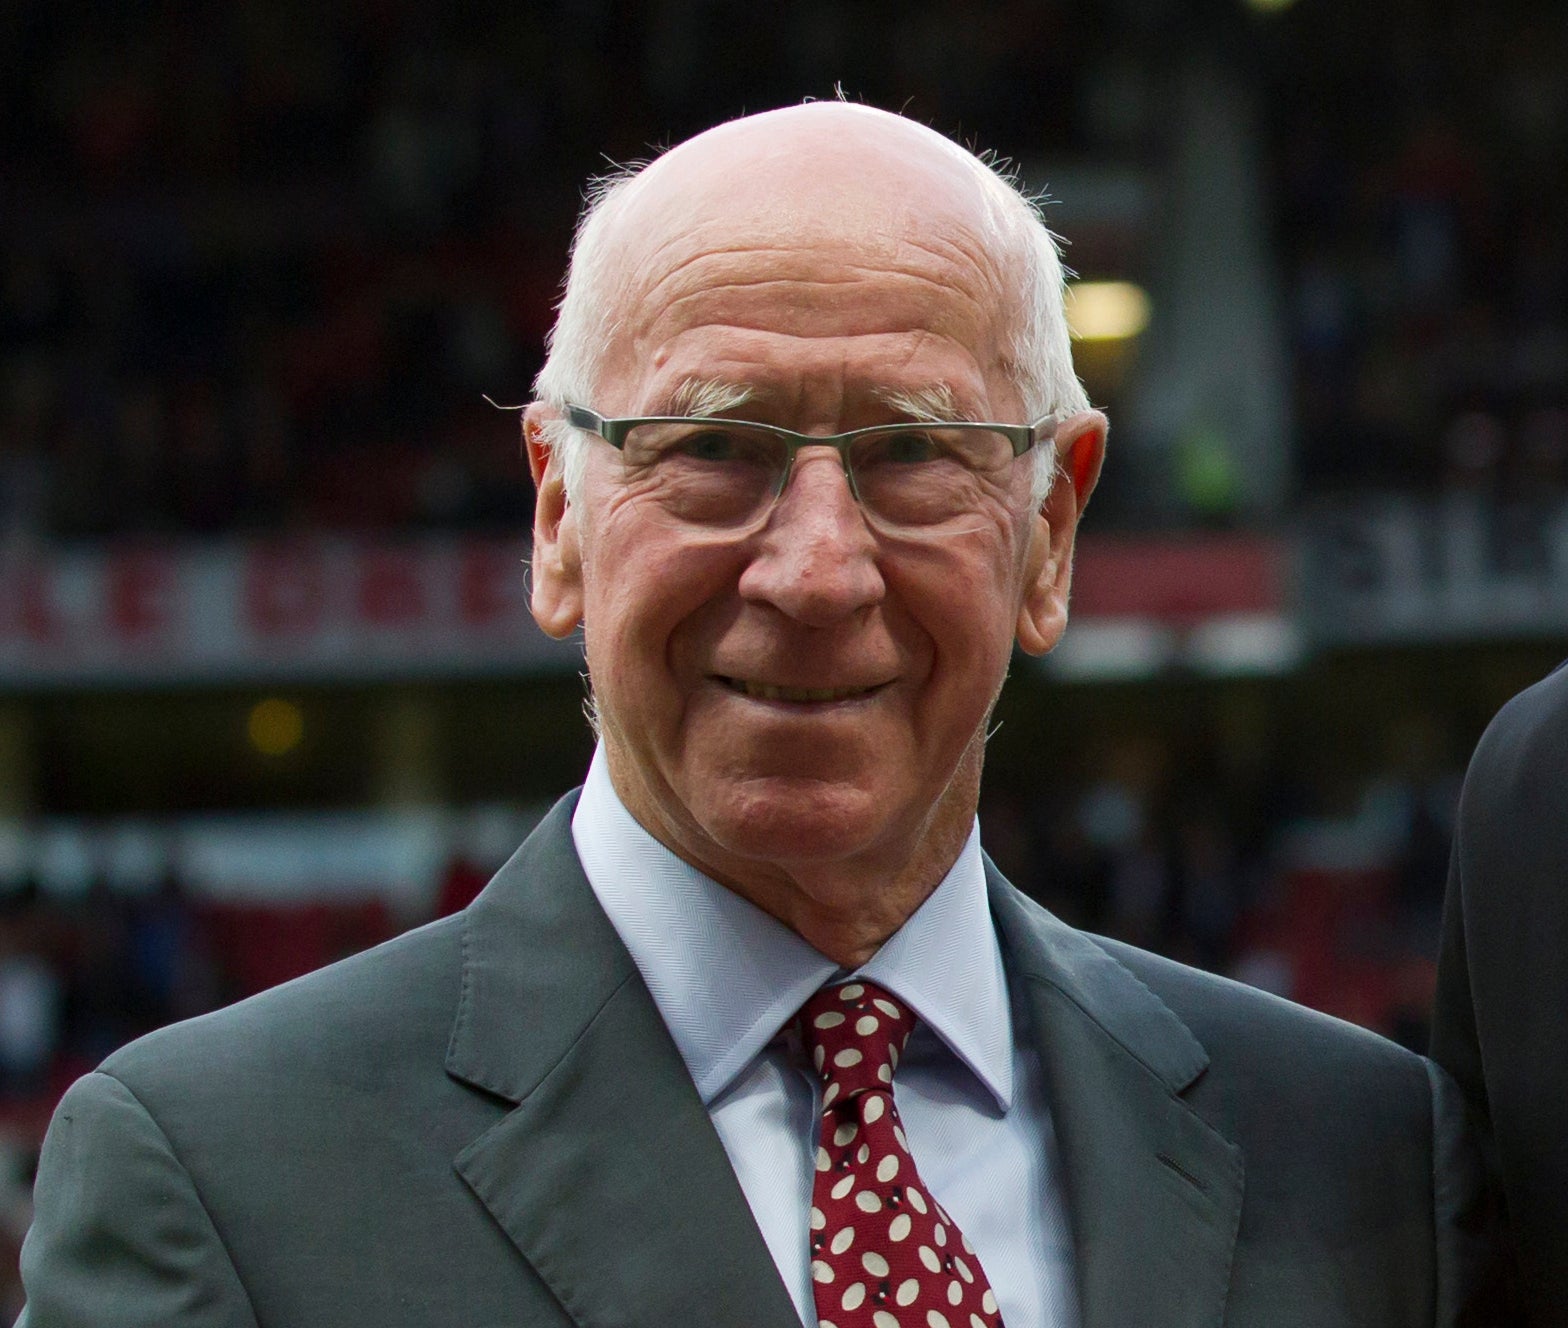 Manchester United great Bobby Charlton has been diagnosed with dementia, his wife has said